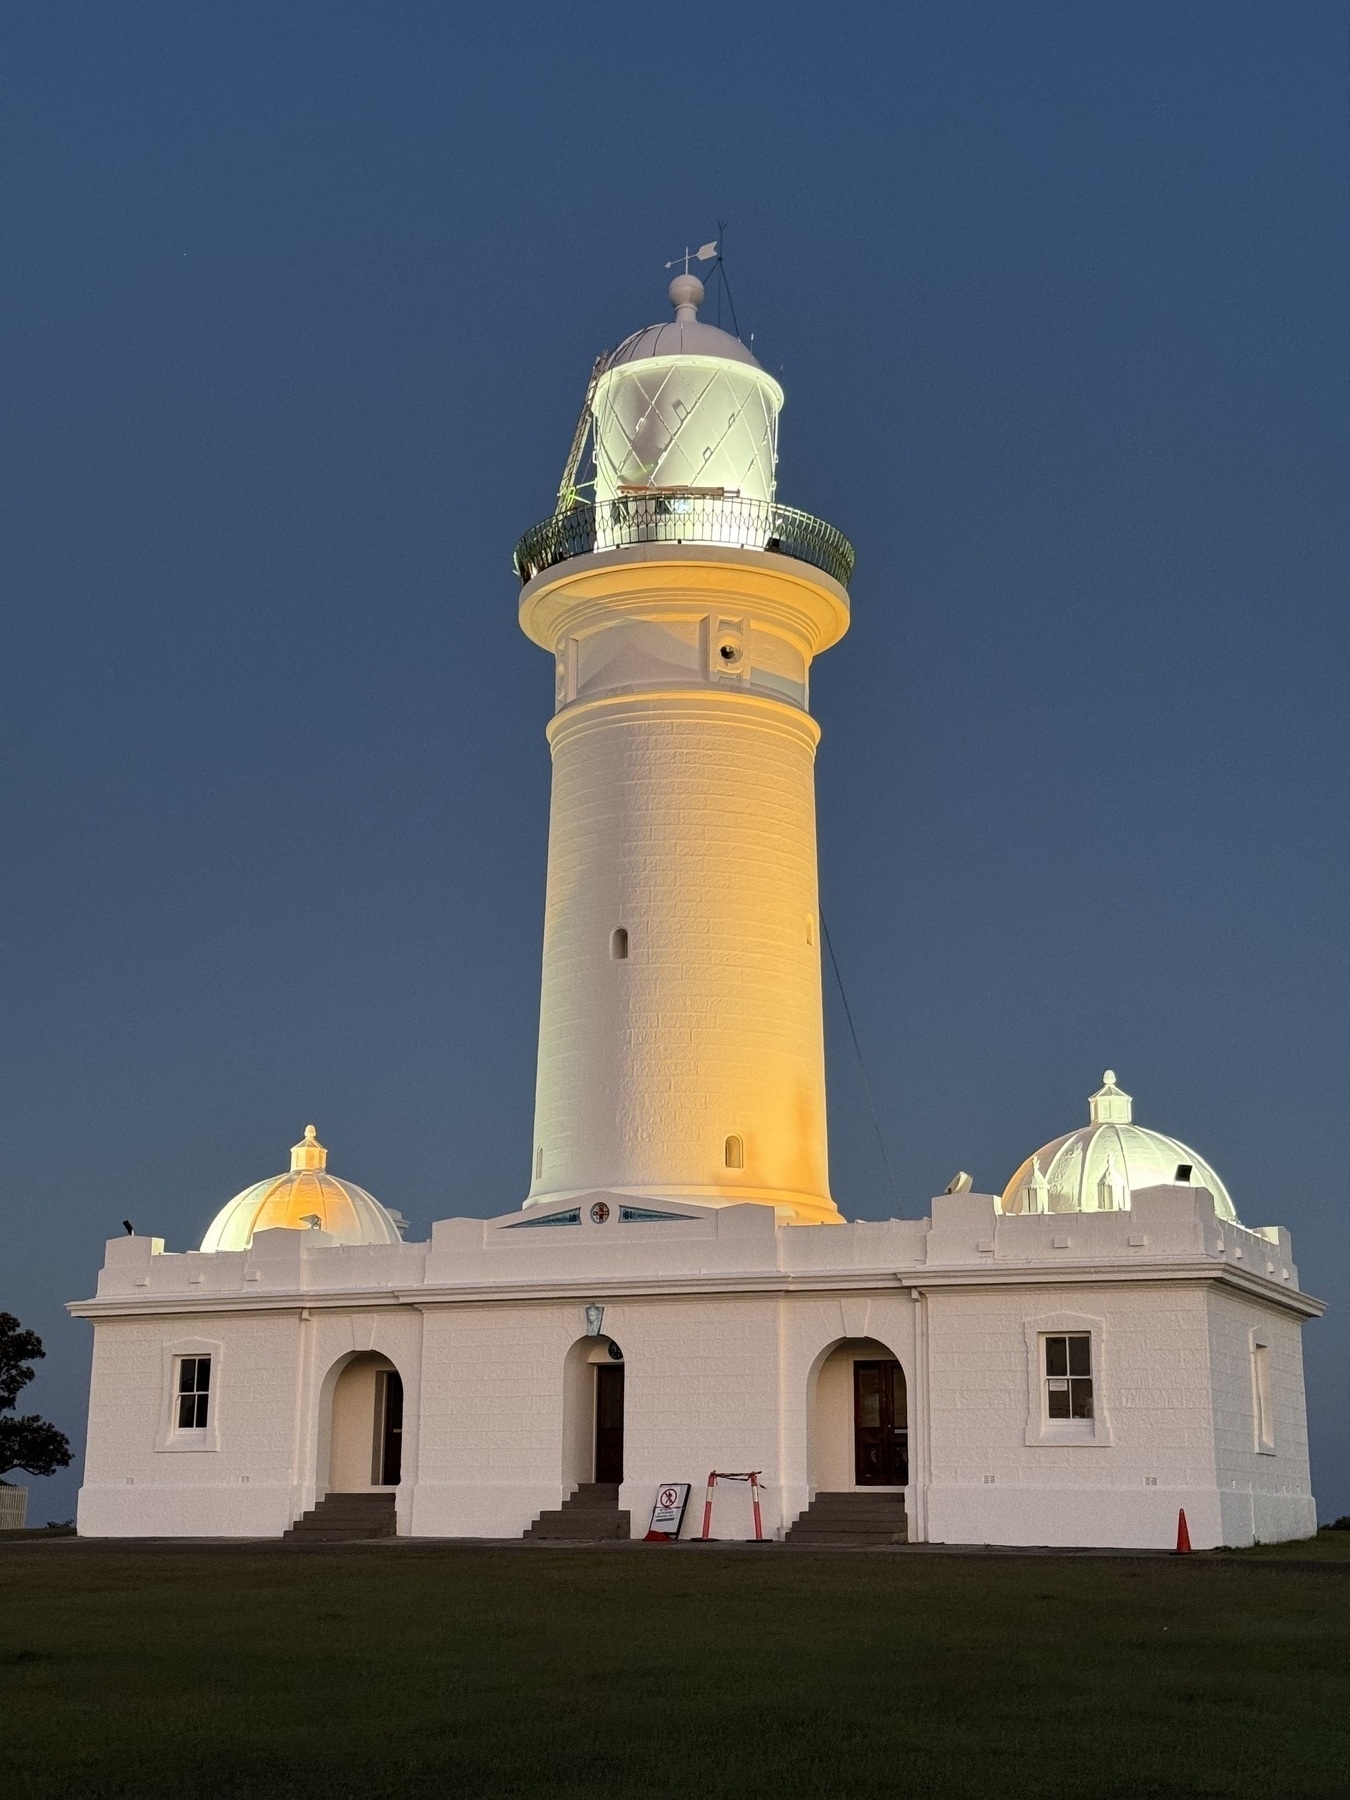 A white lighthouse with a rectangular building at the base, against a dark blue sky.